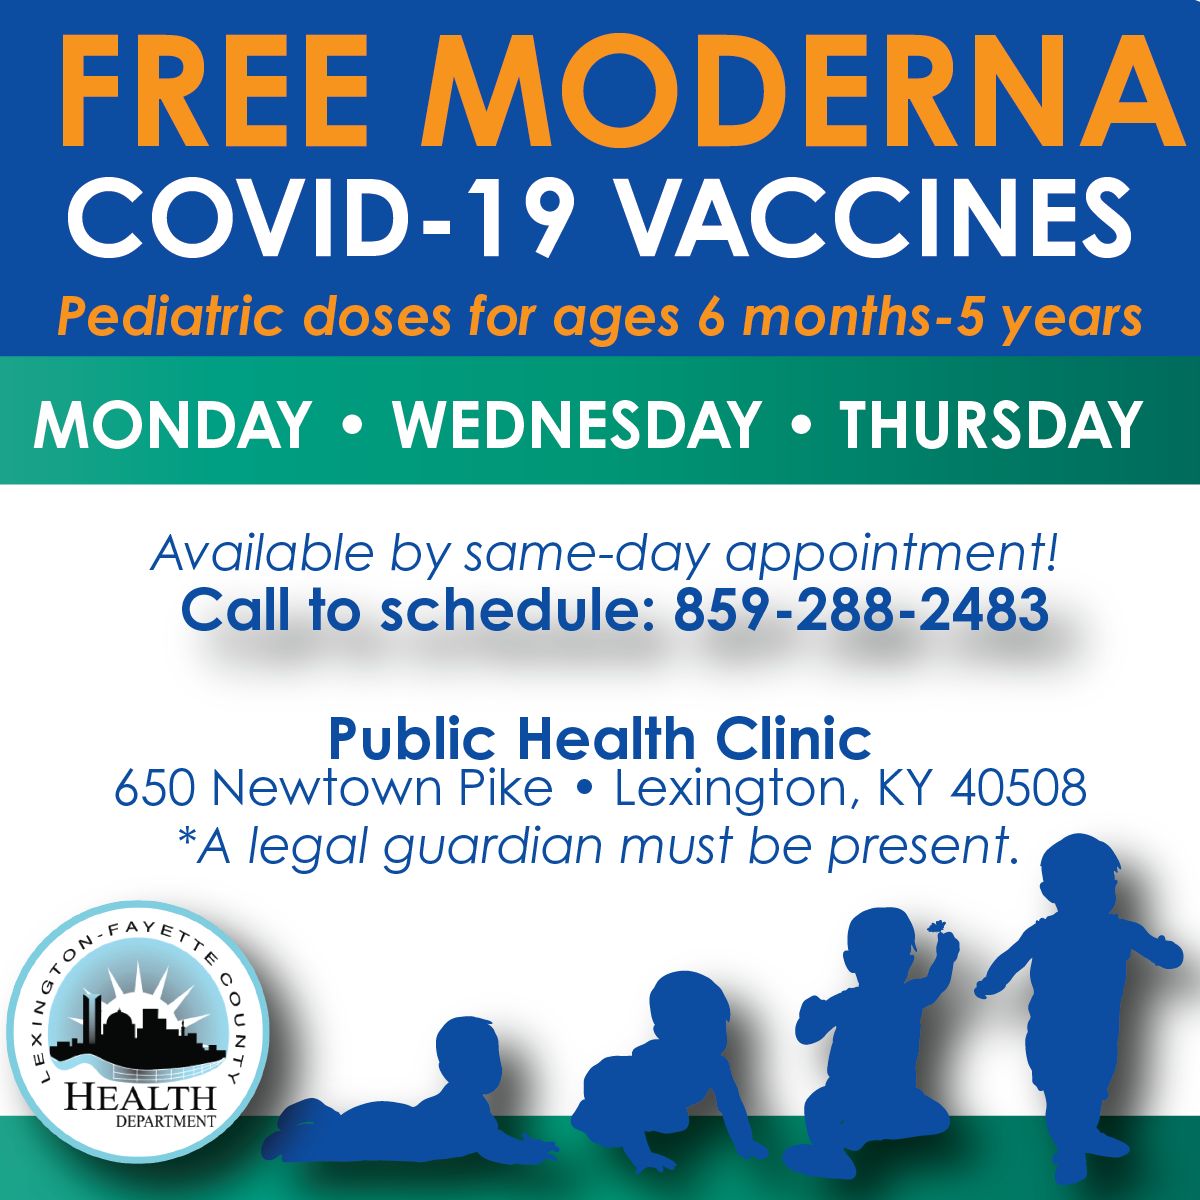 Moderna COVID-19 vaccine for ages 6 months-5 years available June 29